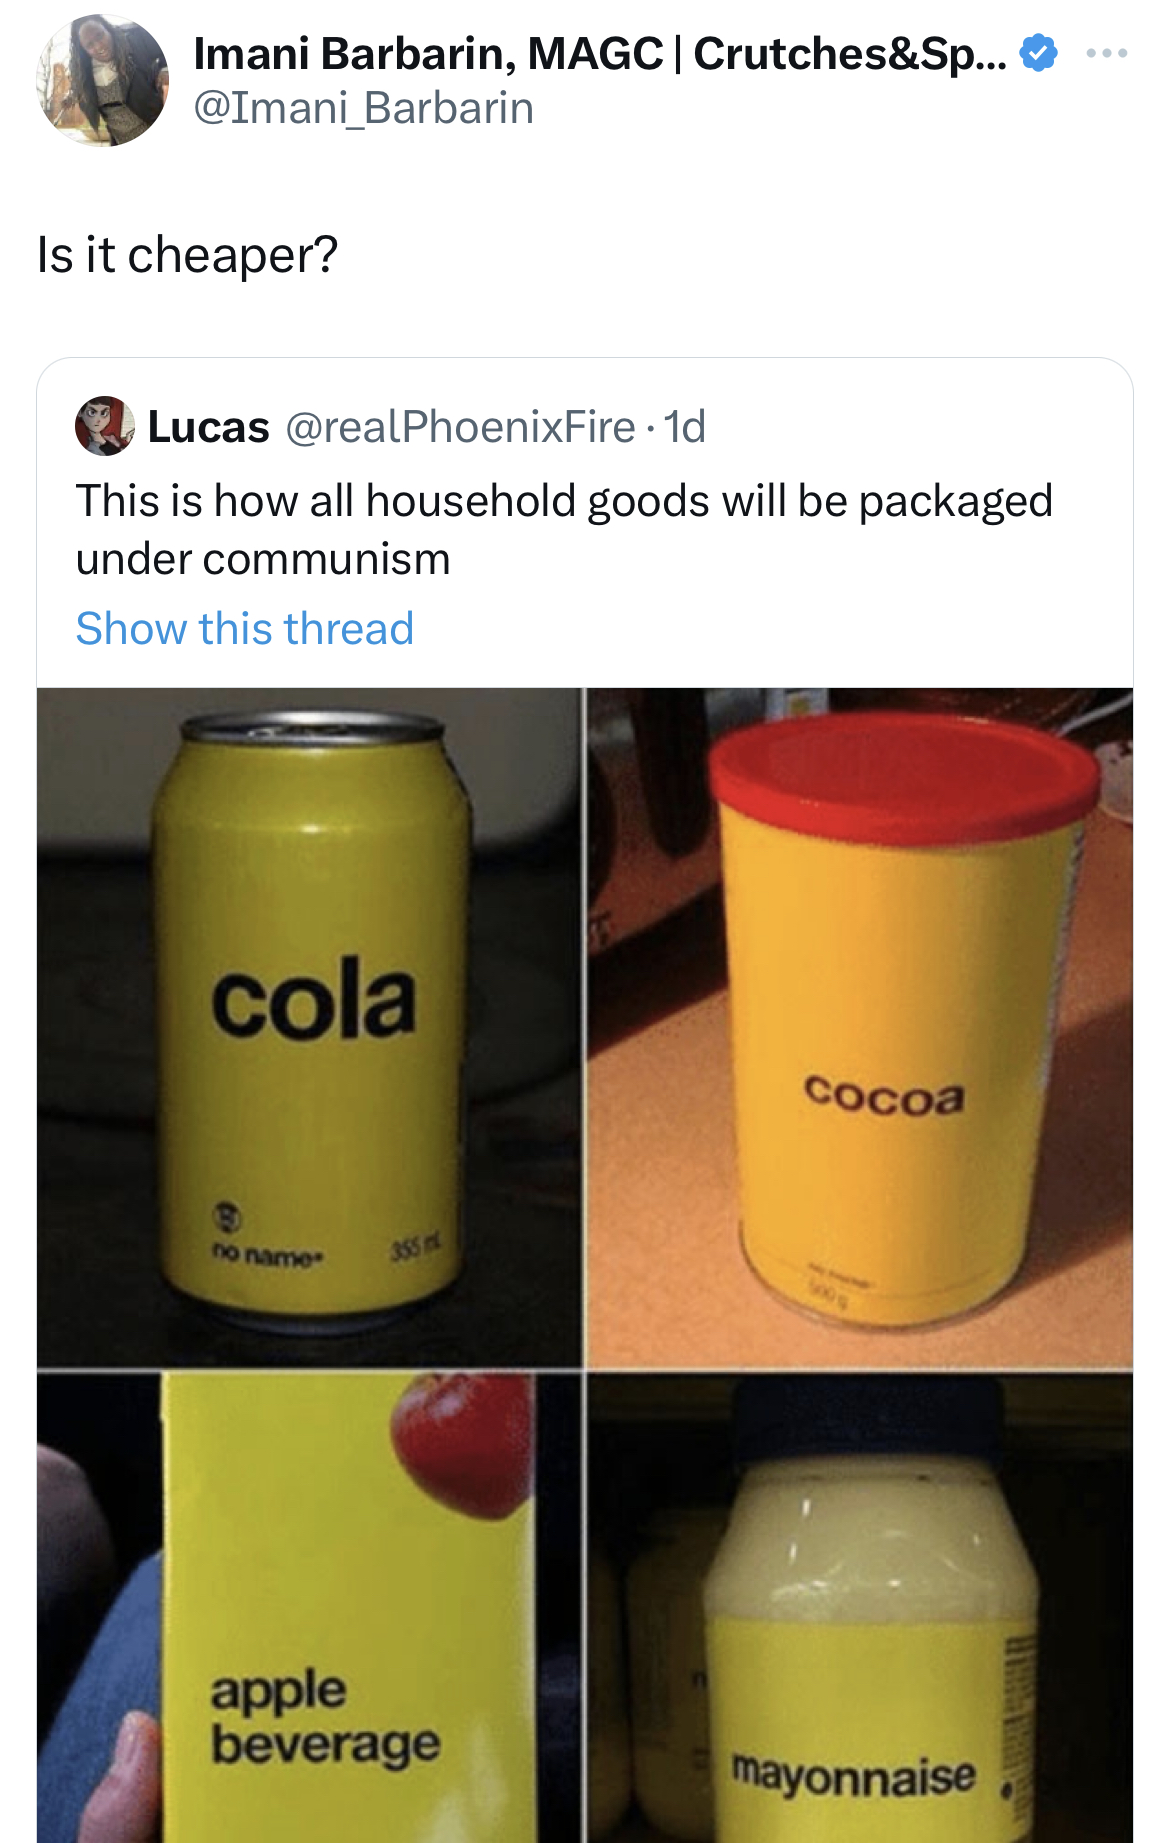 savage tweets - estádio municipal paulo machado de carvalho - Imani Barbarin, Magc | Crutches&Sp... Is it cheaper? Lucas 1d This is how all household goods will be packaged under communism Show this thread cola apple beverage cocoa mayonnaise www